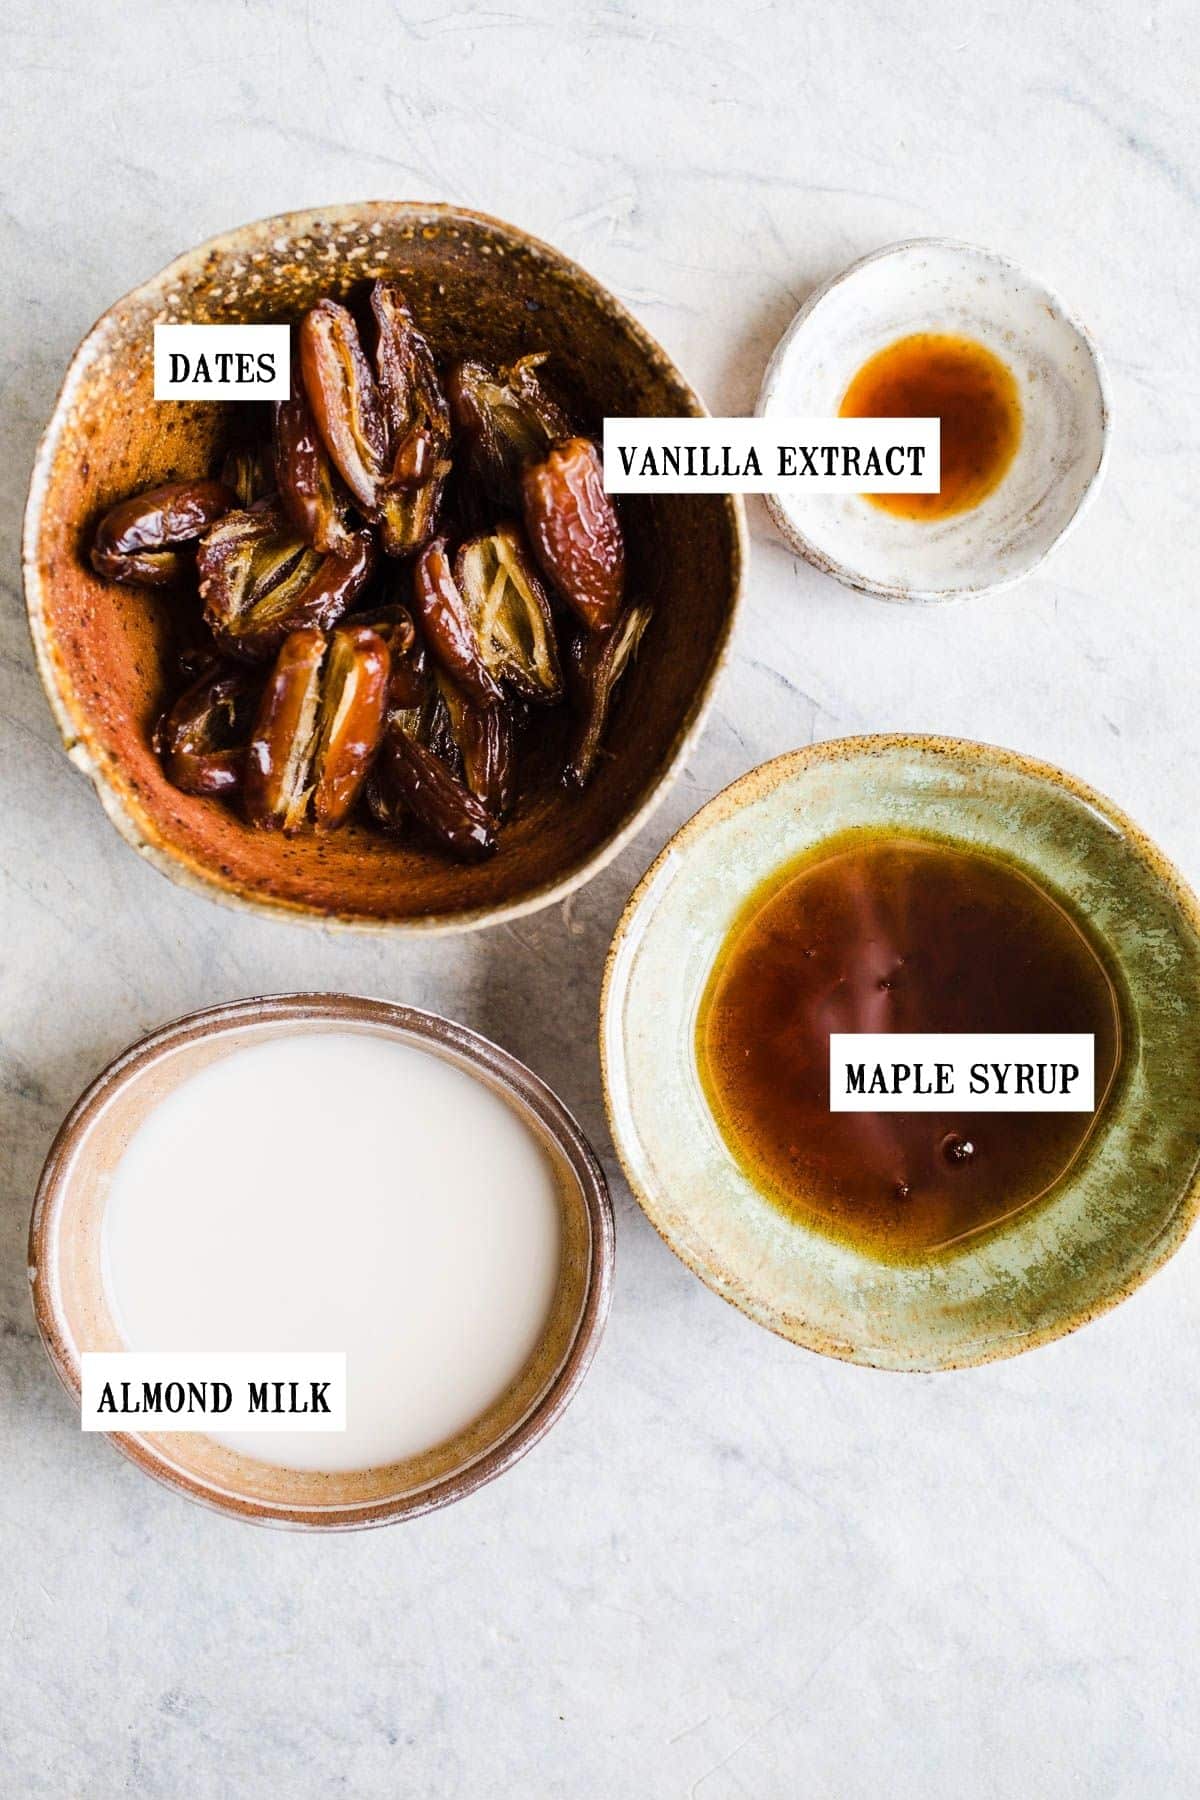 Dates, almond milk, maple syrup, and vanilla extract all in separate bowls.